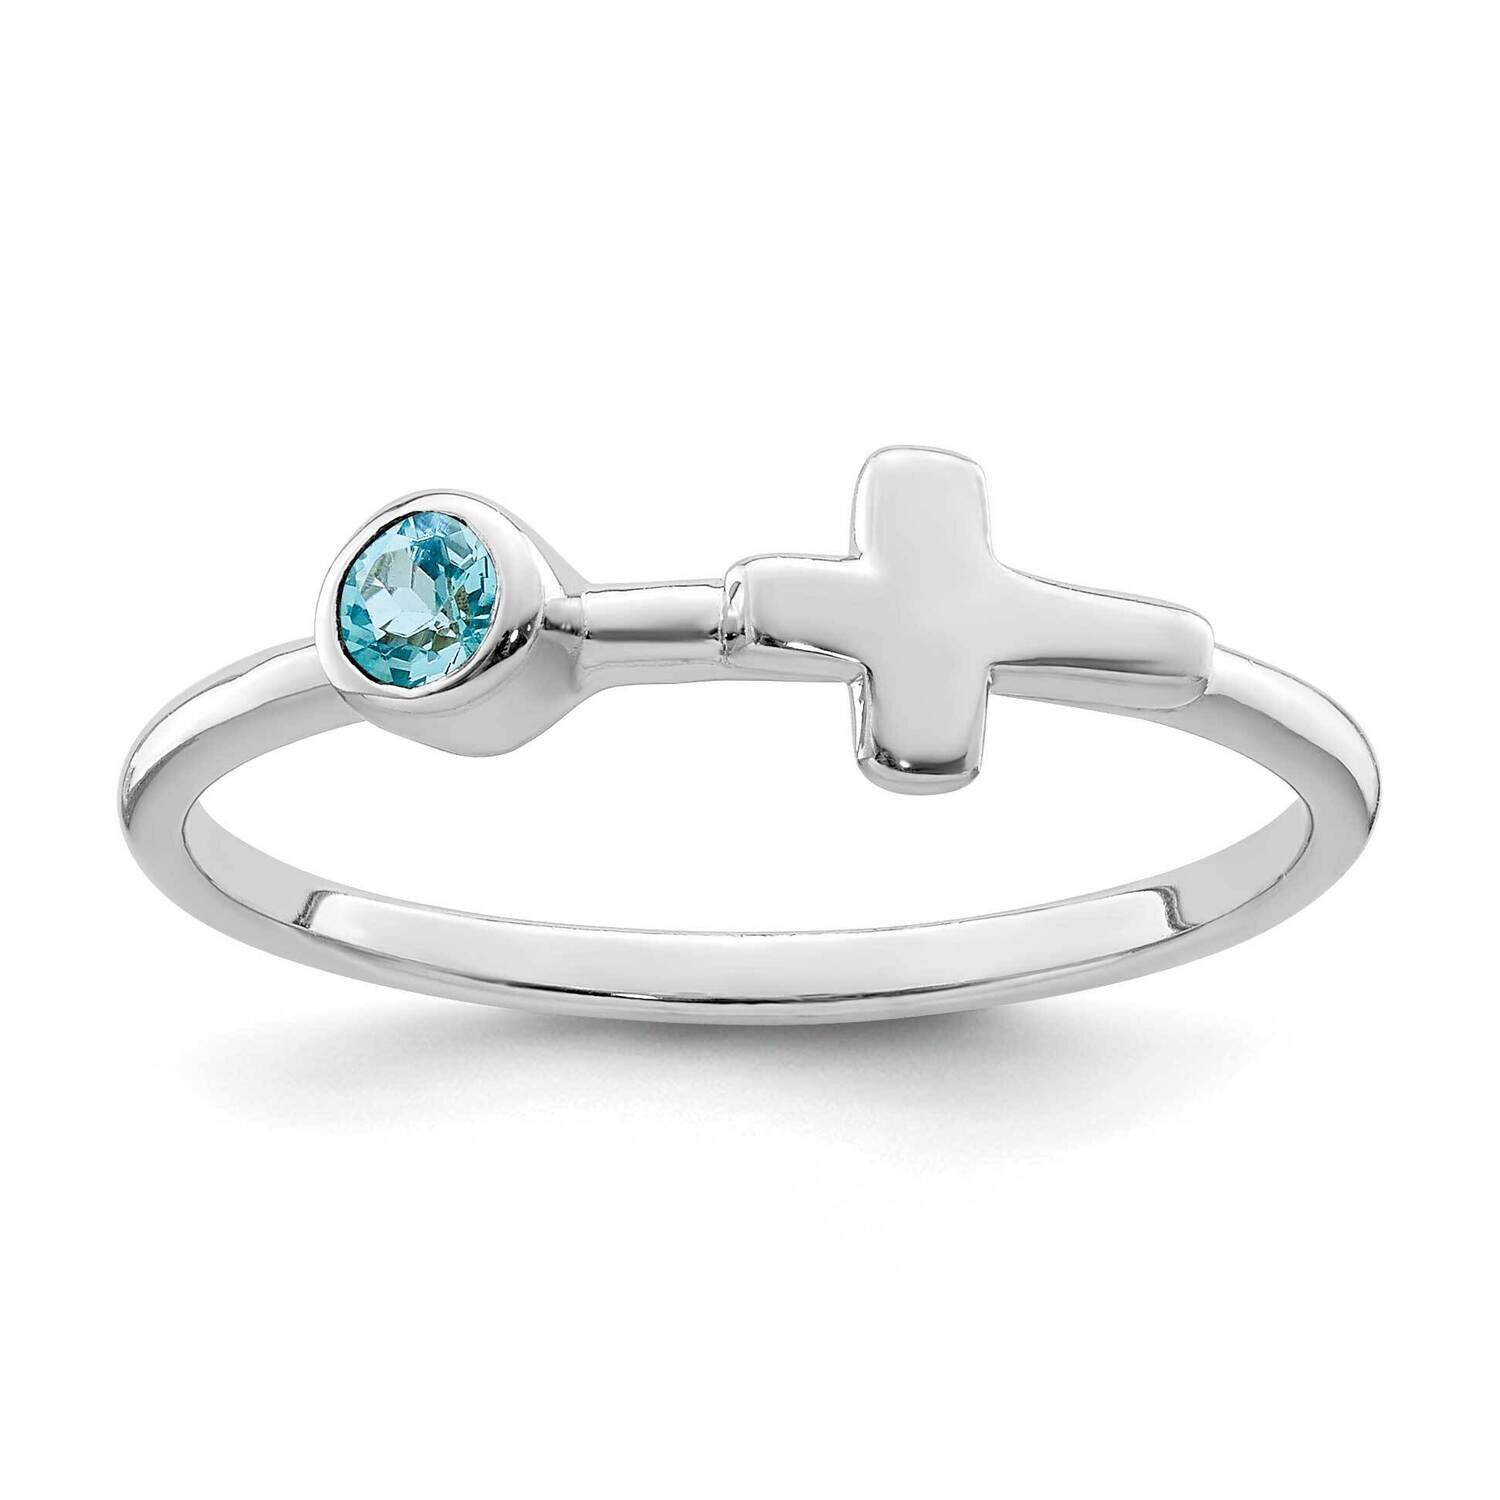 Cross Ls Blue Topaz Ring Sterling Silver Rhodium-Plated Polished QBR33DEC